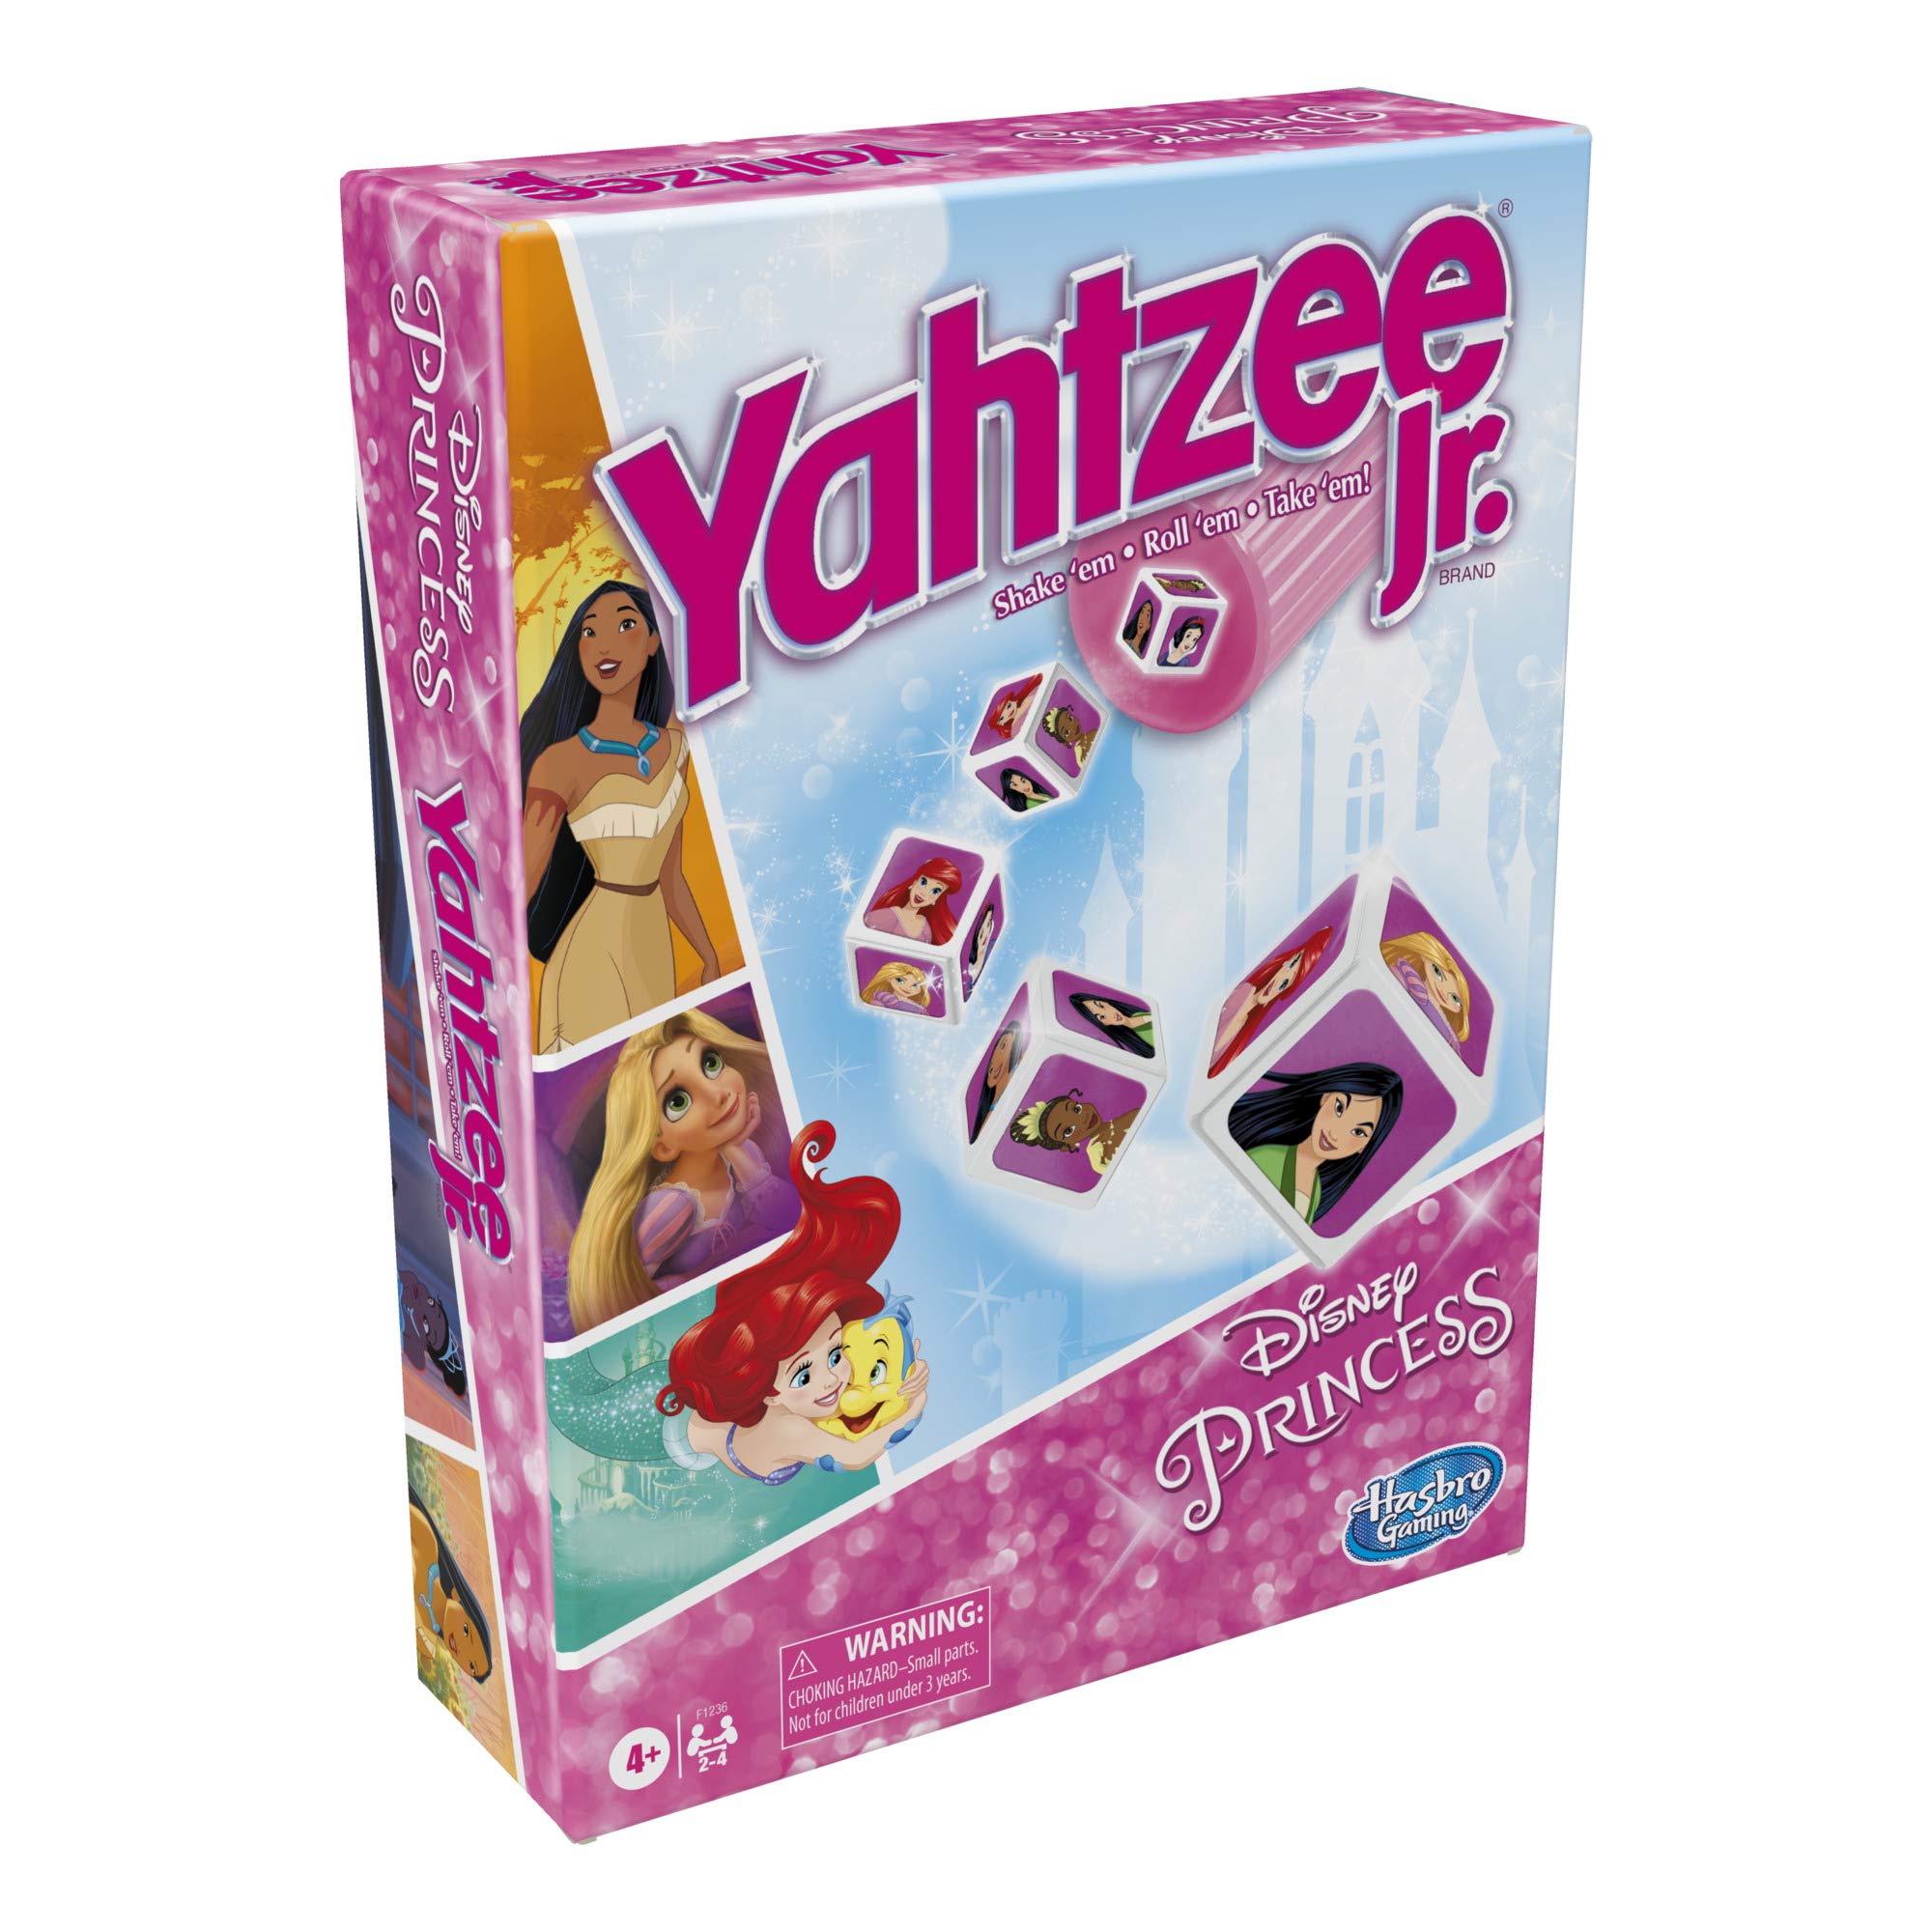 Yahtzee Jr.: Disney Princess Edition Board Game for Kids Ages 4 and Up, for 2-4 Players, Counting and Matching Game for Preschoolers (Amazon Exclusive)